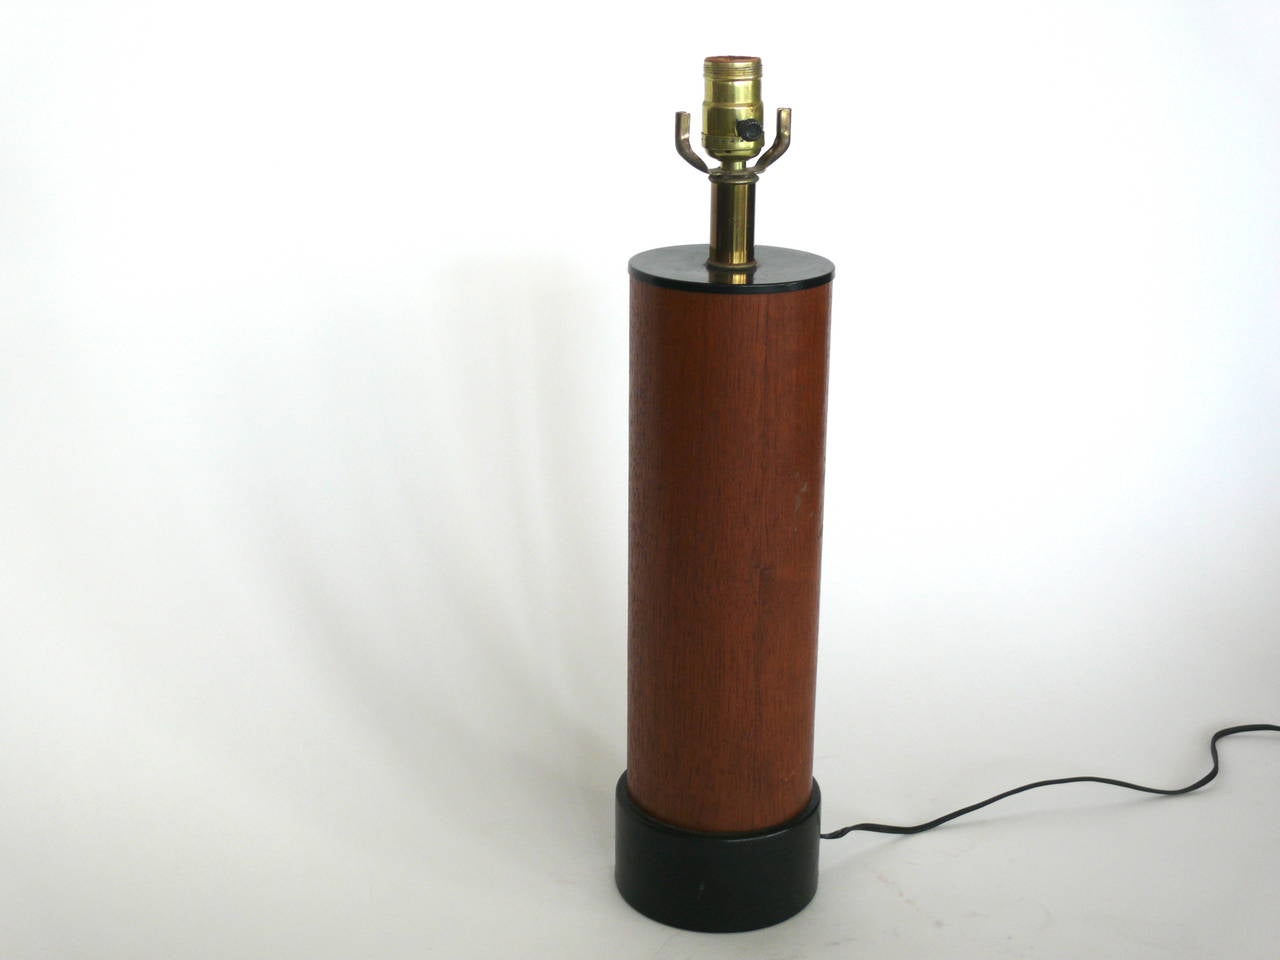 Handsome solid wood and leather lamp. Beautiful teak wood with black leather base. Newly rewired. Good vintage condition.